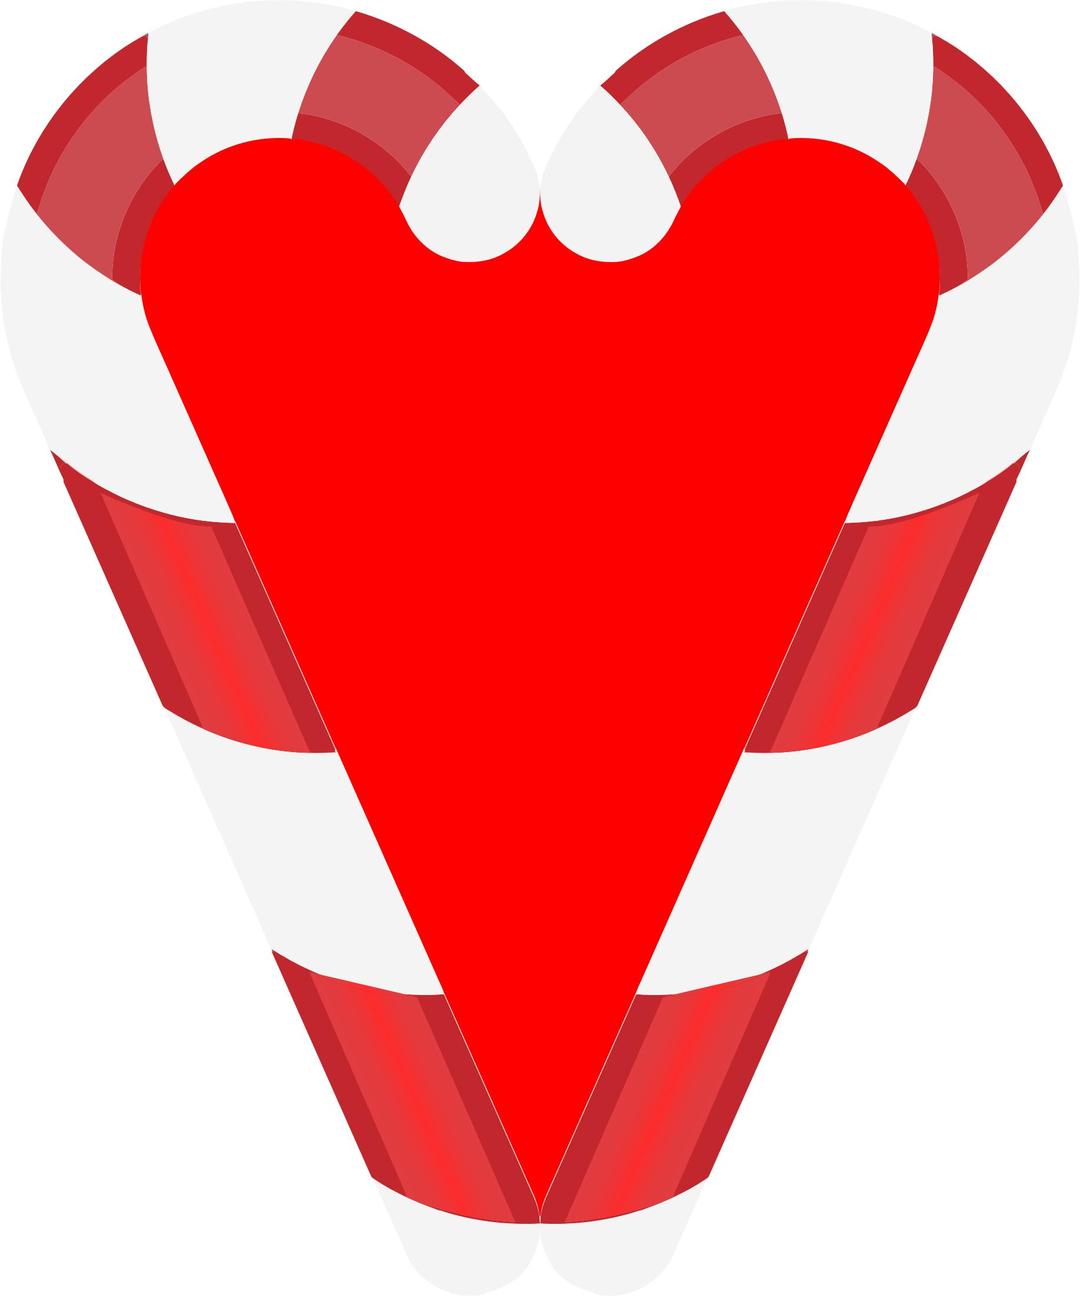 Candy Cane Heart 2 png transparent